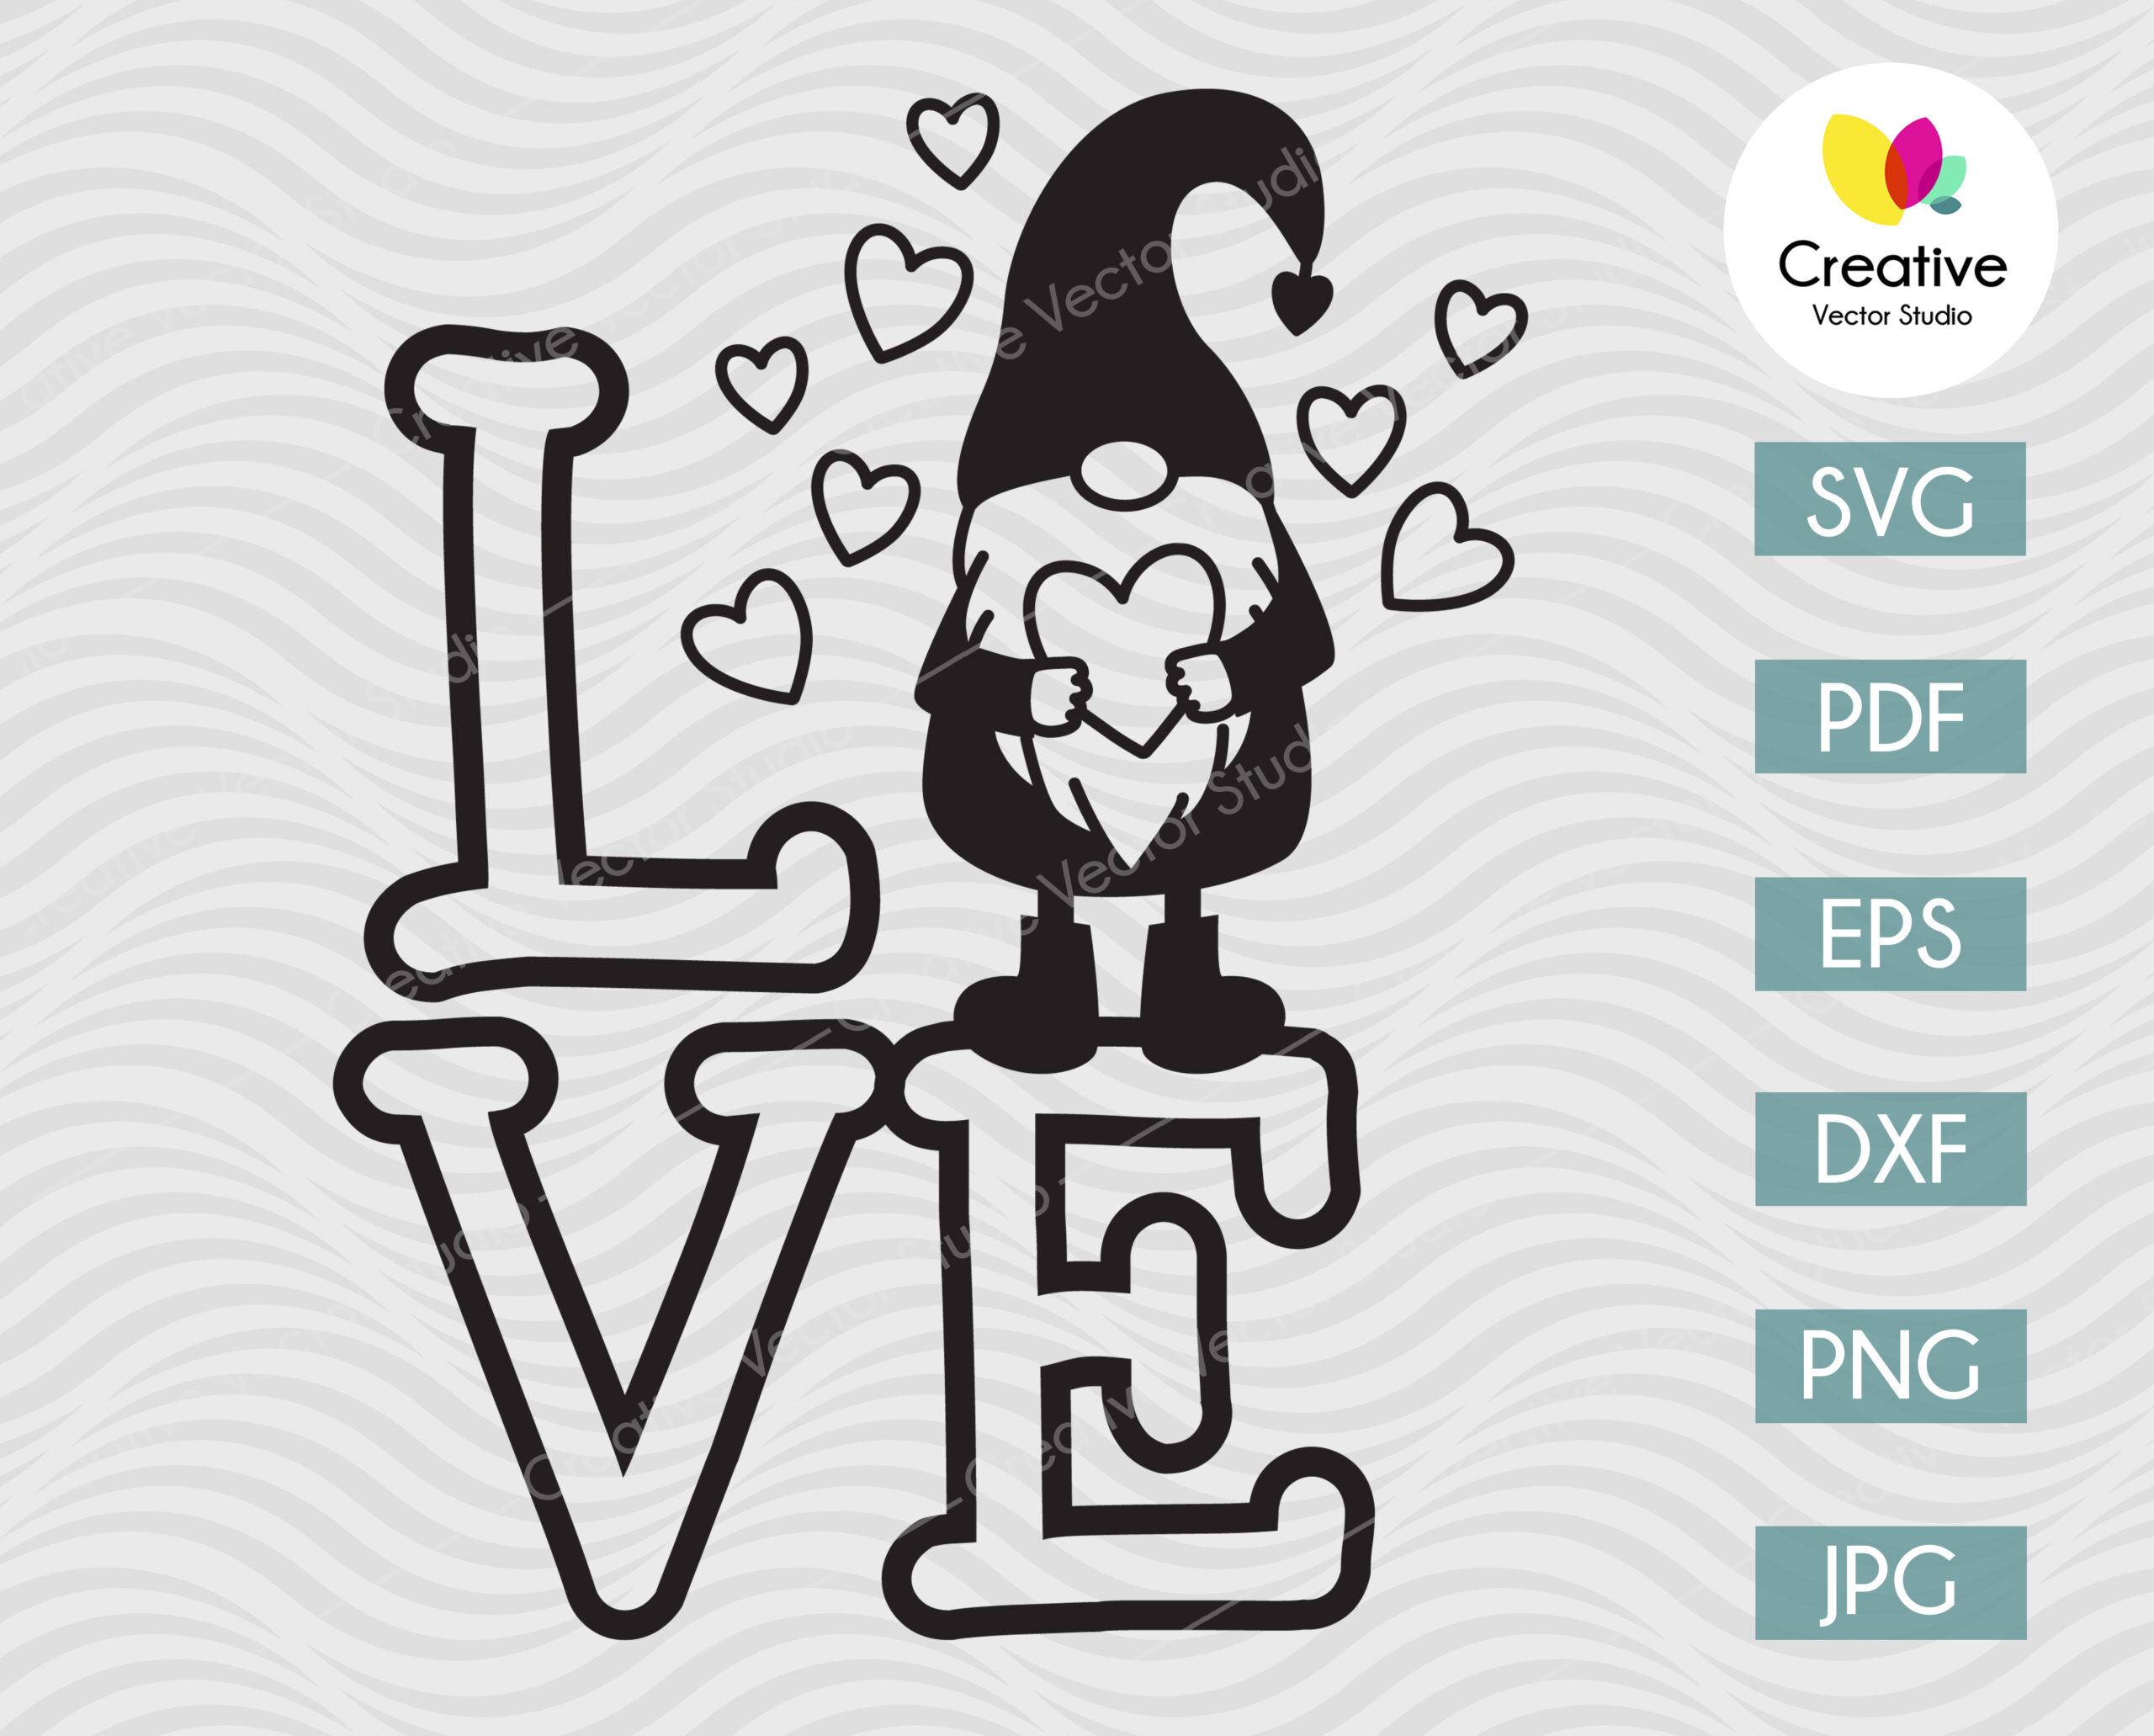 Gnome Svg Love Heart Svg Gnome Patterns Valentines Day Svg Valentine Gnome Svg Gnomes Gnomes Valentines Gnome Valentine Svg Png Dxf